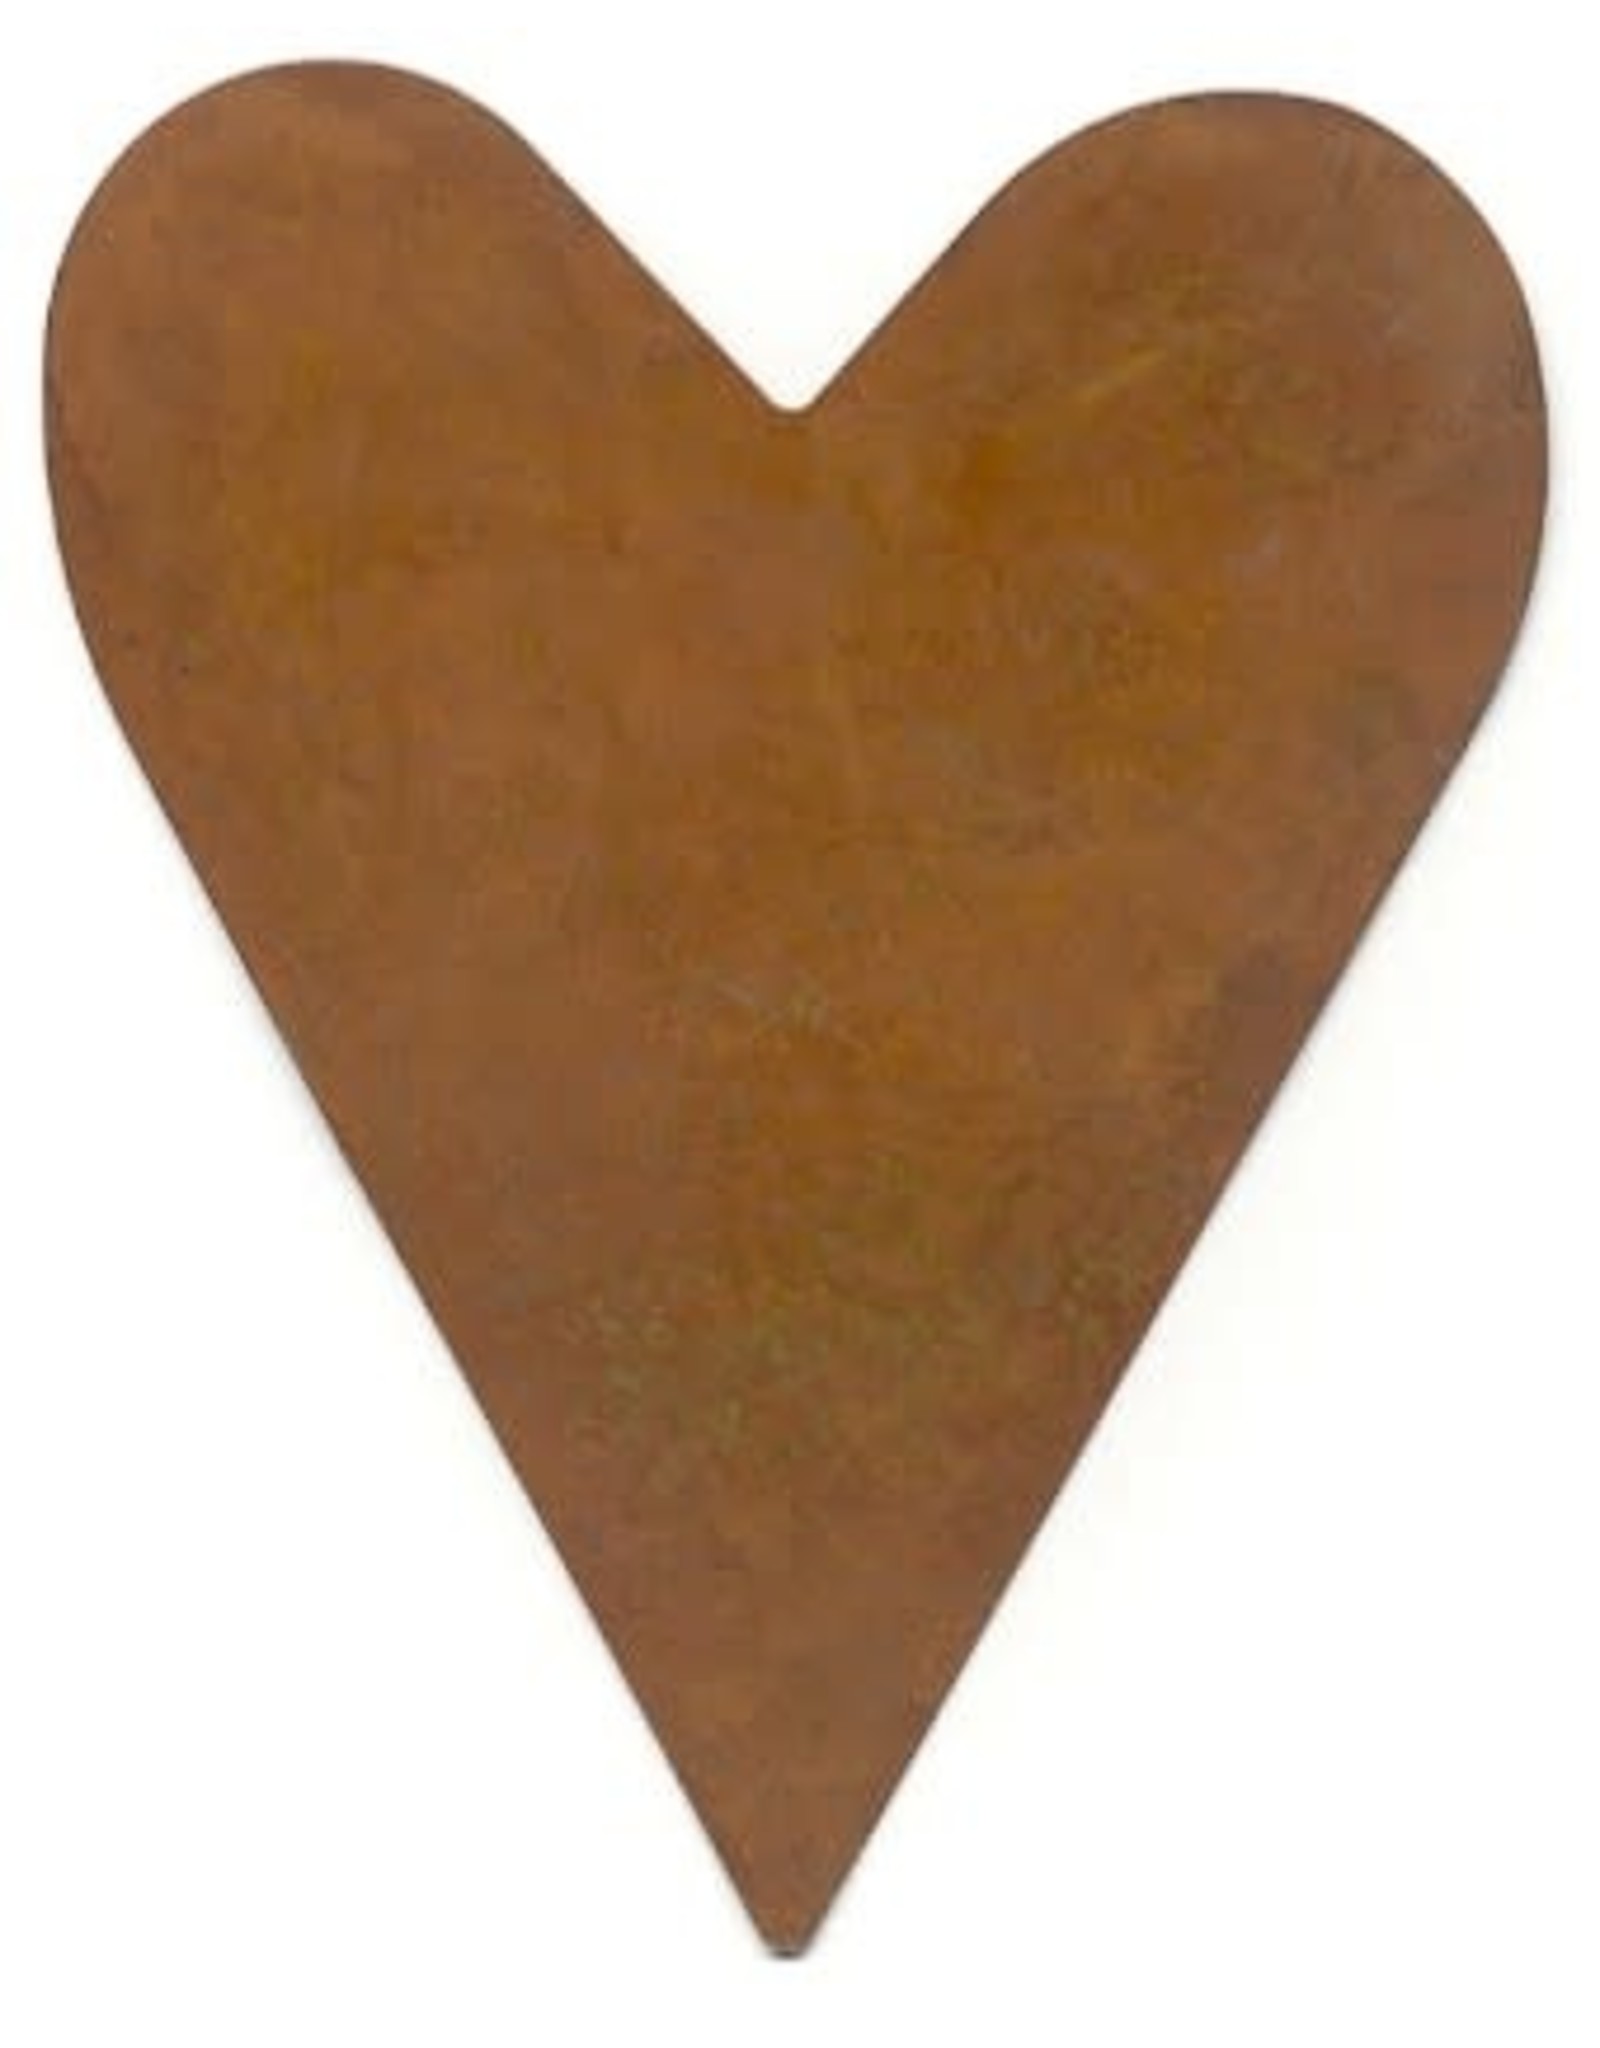 RUSTY TIN HEART 4 1/4" (NO HOLE) PACKAGED 12